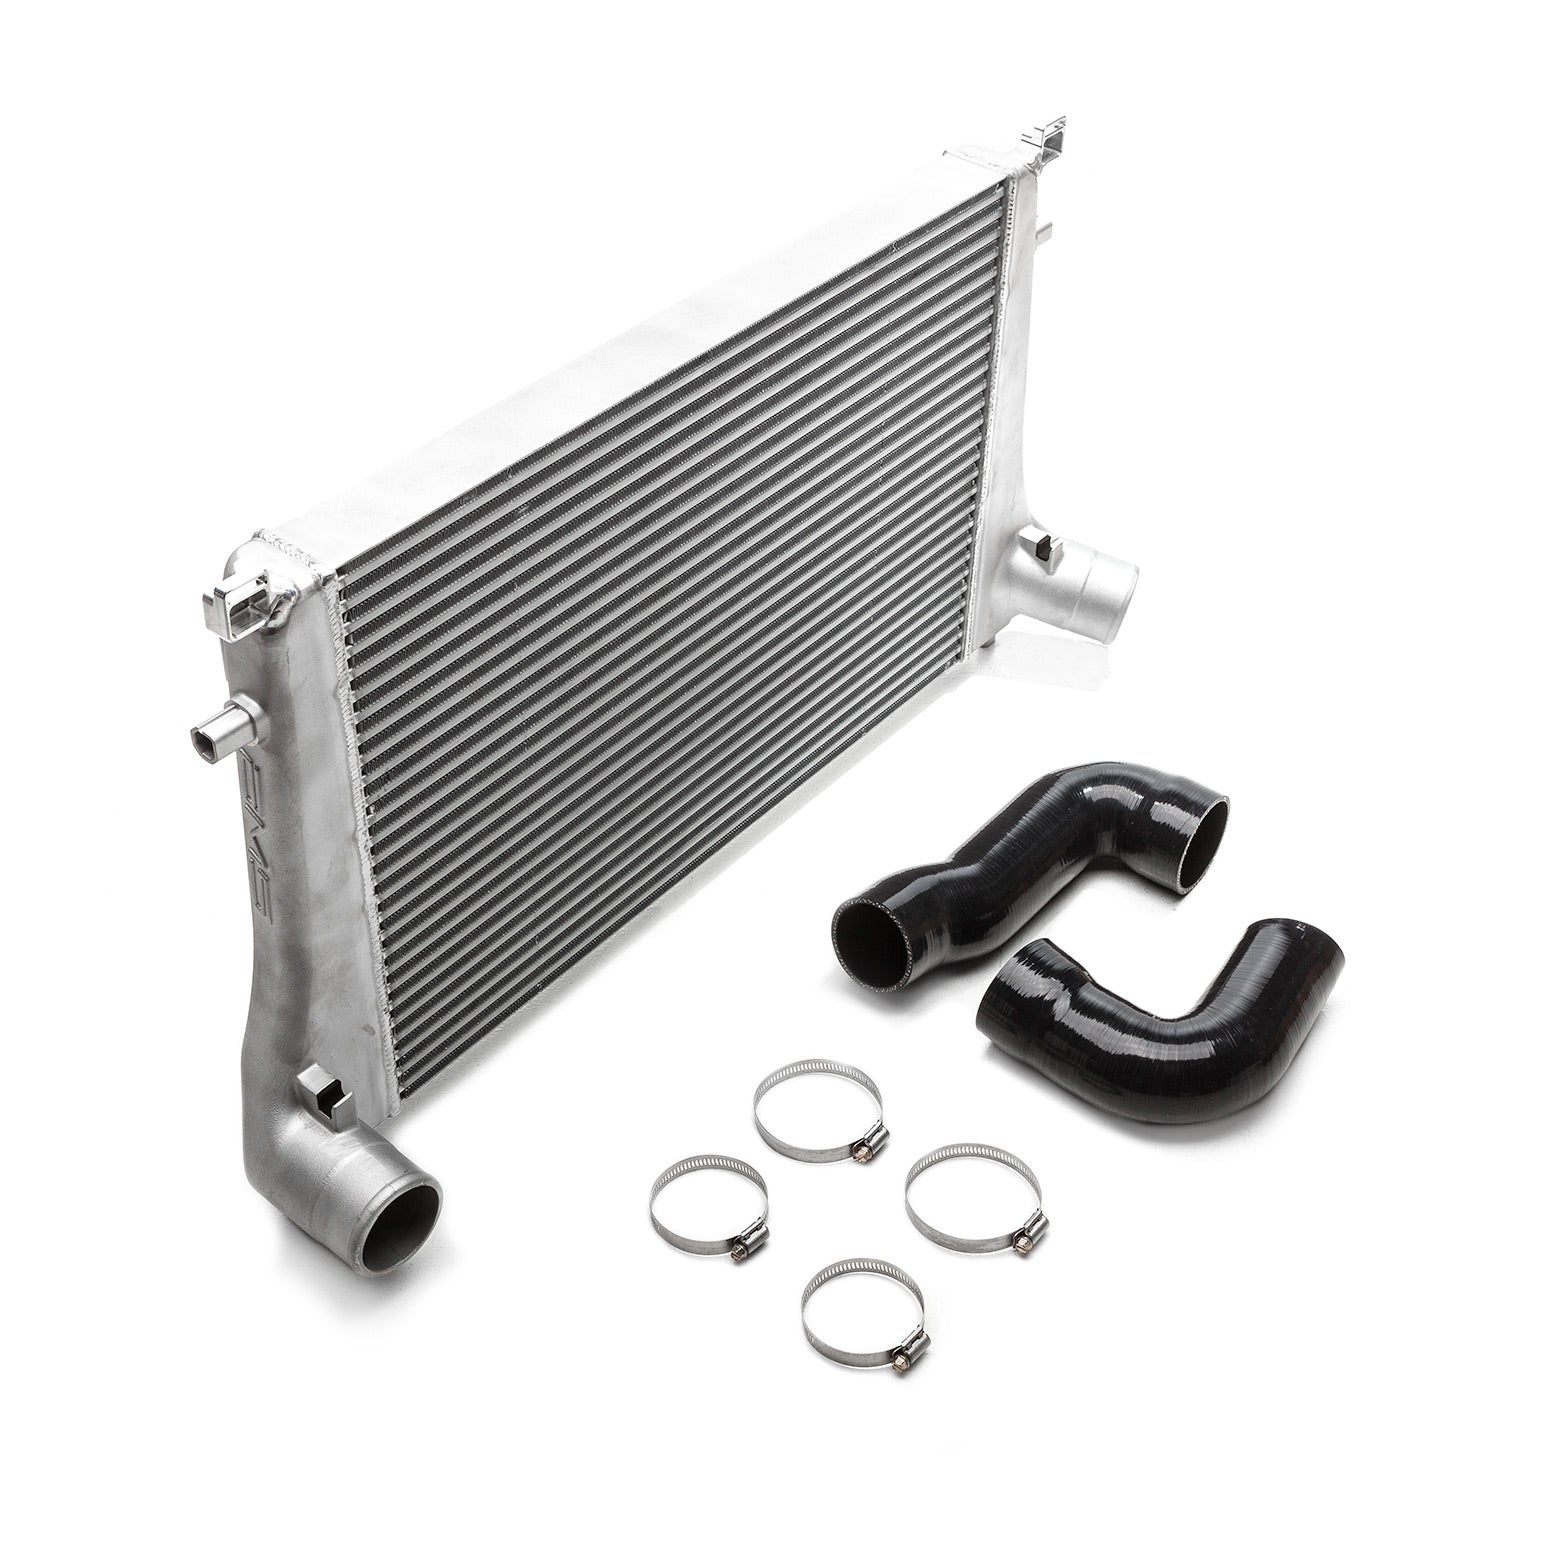 COBB VLK0030020-DSG-A AUDI Stage 2 Power Package with S Tronic Flashing S3 (8V) Photo-1 